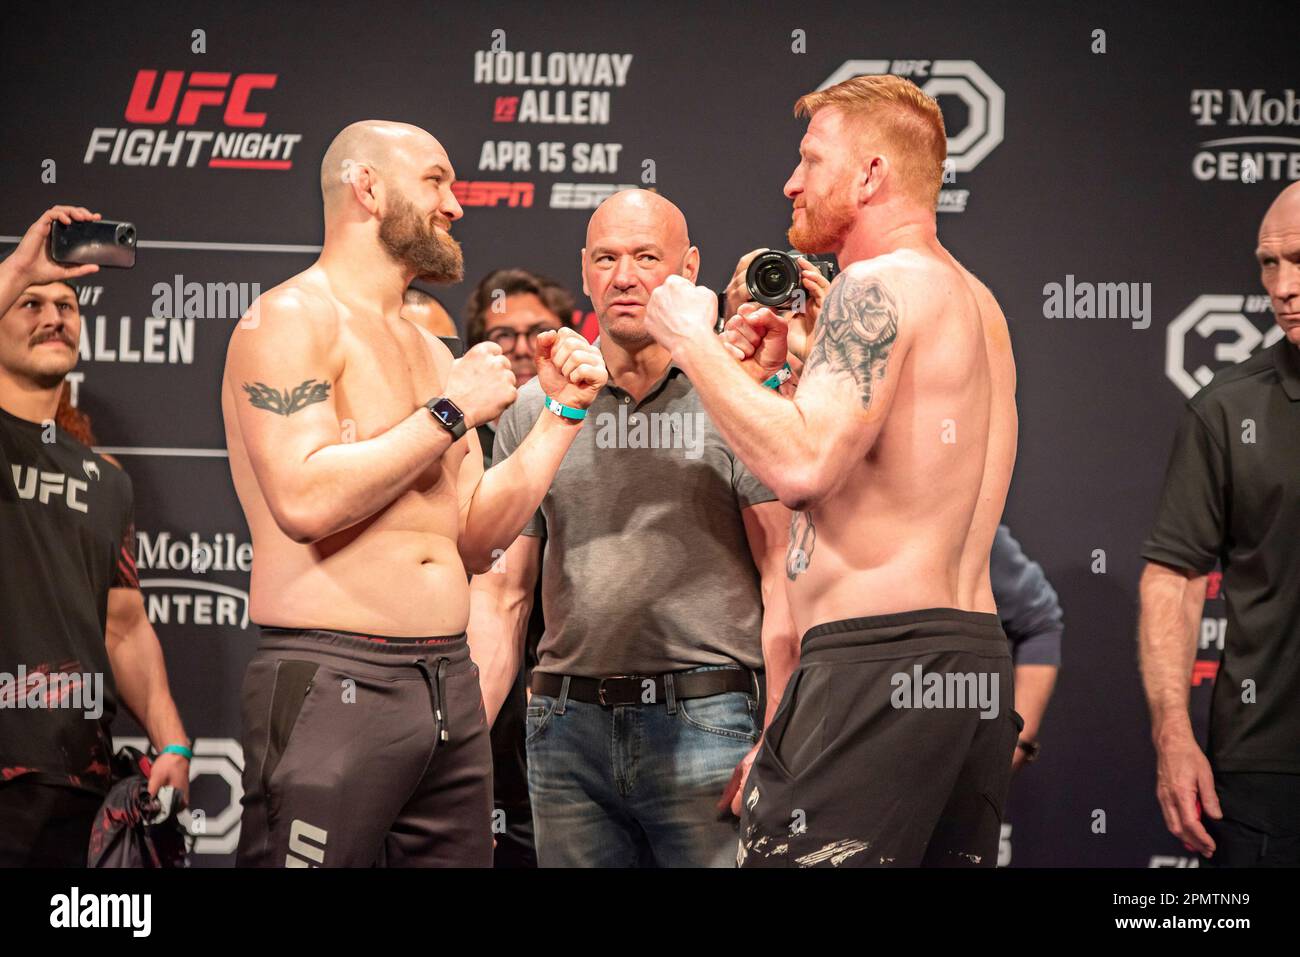 https://c8.alamy.com/comp/2PMTNN9/kansas-city-missouri-april-14-l-r-zak-cummings-and-ed-herman-step-on-the-scales-and-face-off-at-the-ceremonial-weigh-ins-for-ufc-fight-night-kansas-city-on-april-14-2023-at-the-t-mobile-center-in-kansas-city-mo-photo-by-matt-daviespximagesicon-sportswire-icon-sportswire-via-ap-images-2PMTNN9.jpg